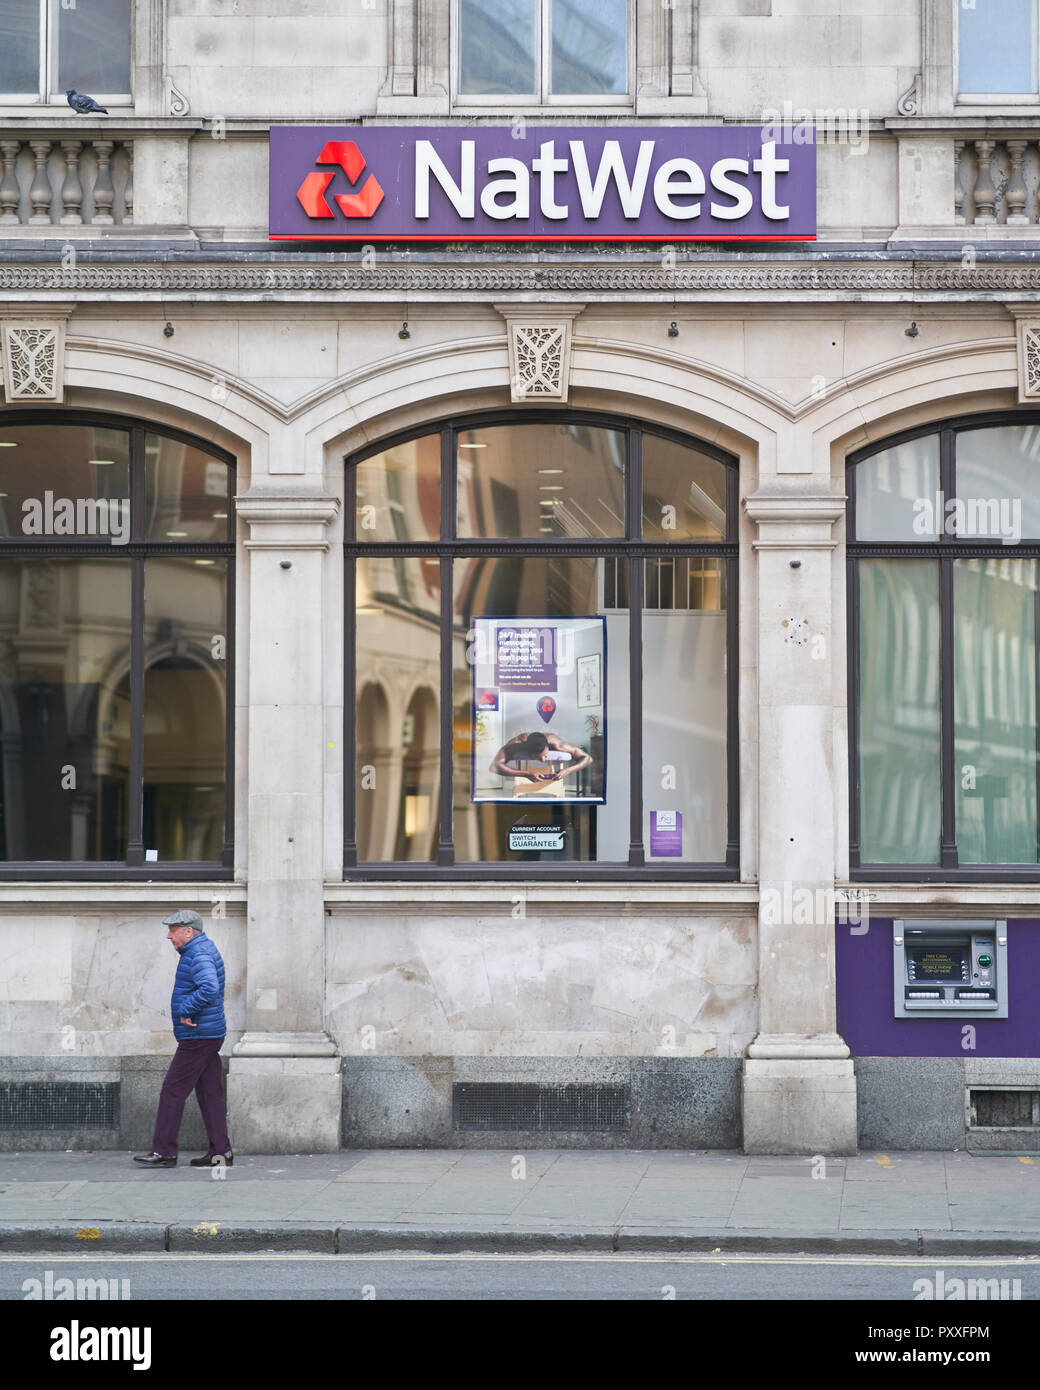 Natwest Bank Branch Stock Photo